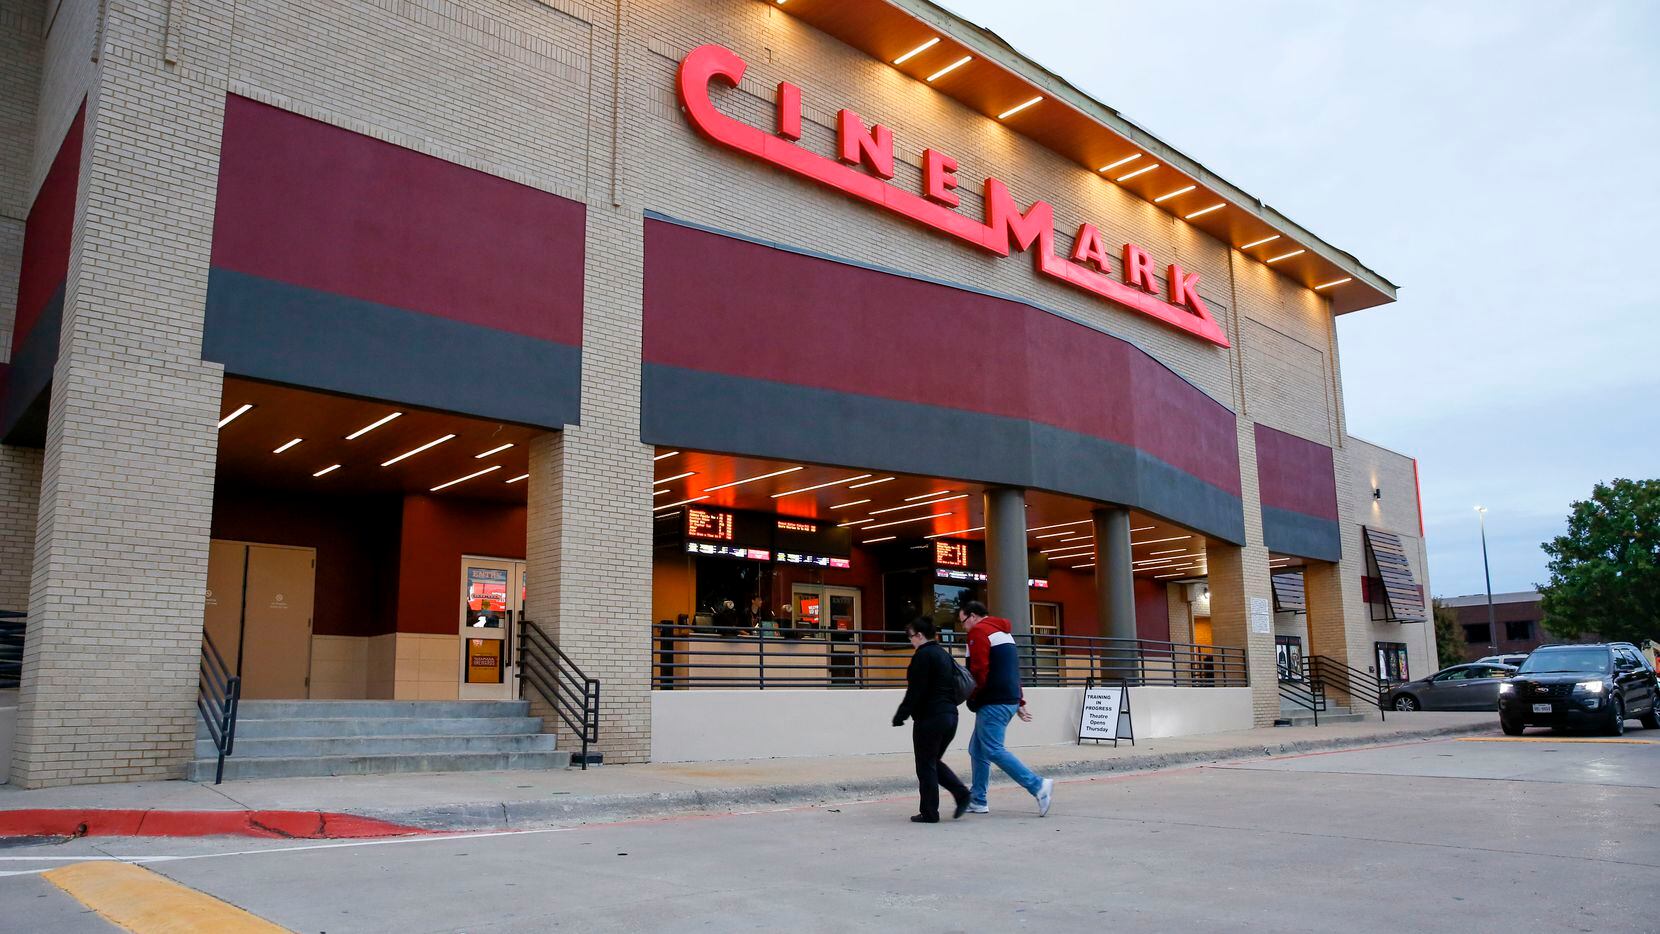 By the end of September, Cinemark had reopened all of its theaters in the U.S. and Latin...